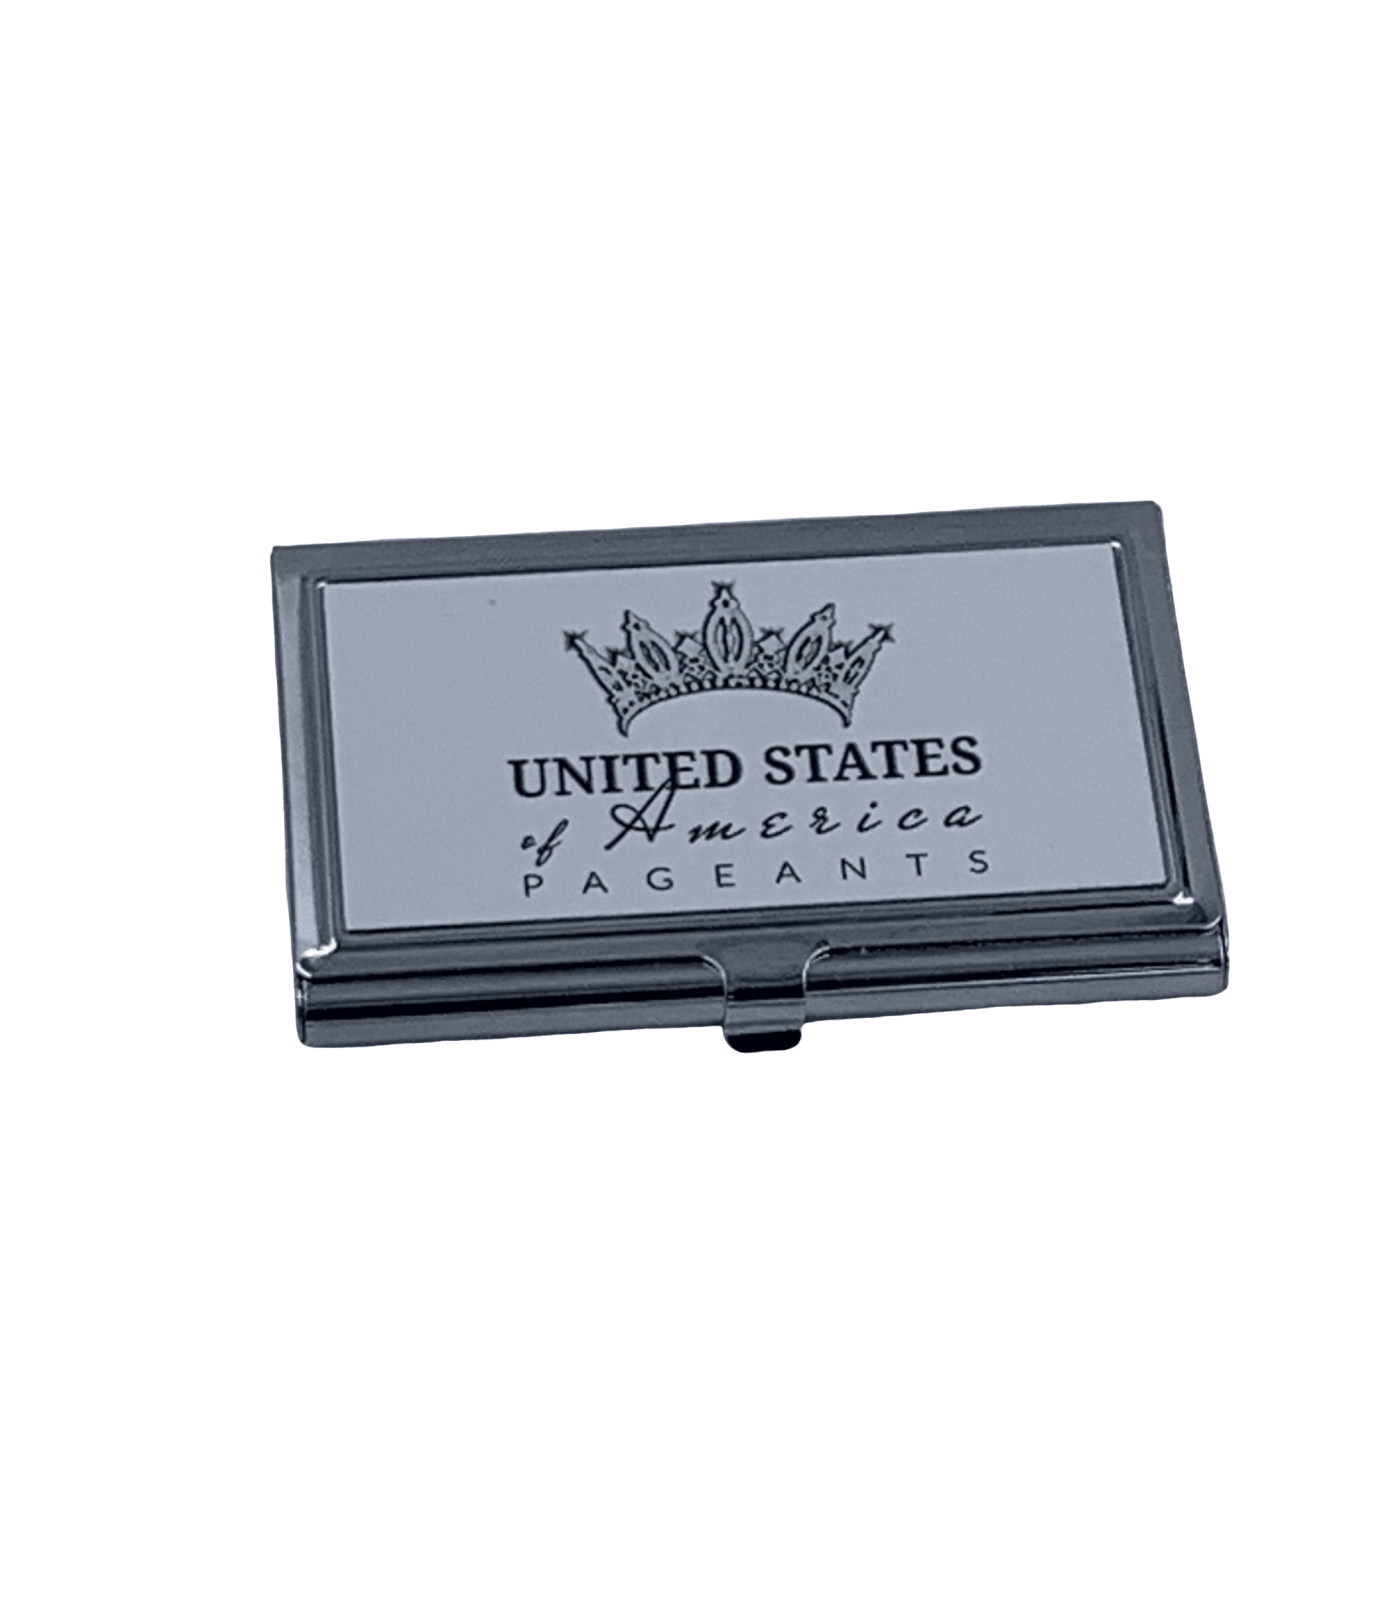 united_states_of_americas_business_card_holder_2